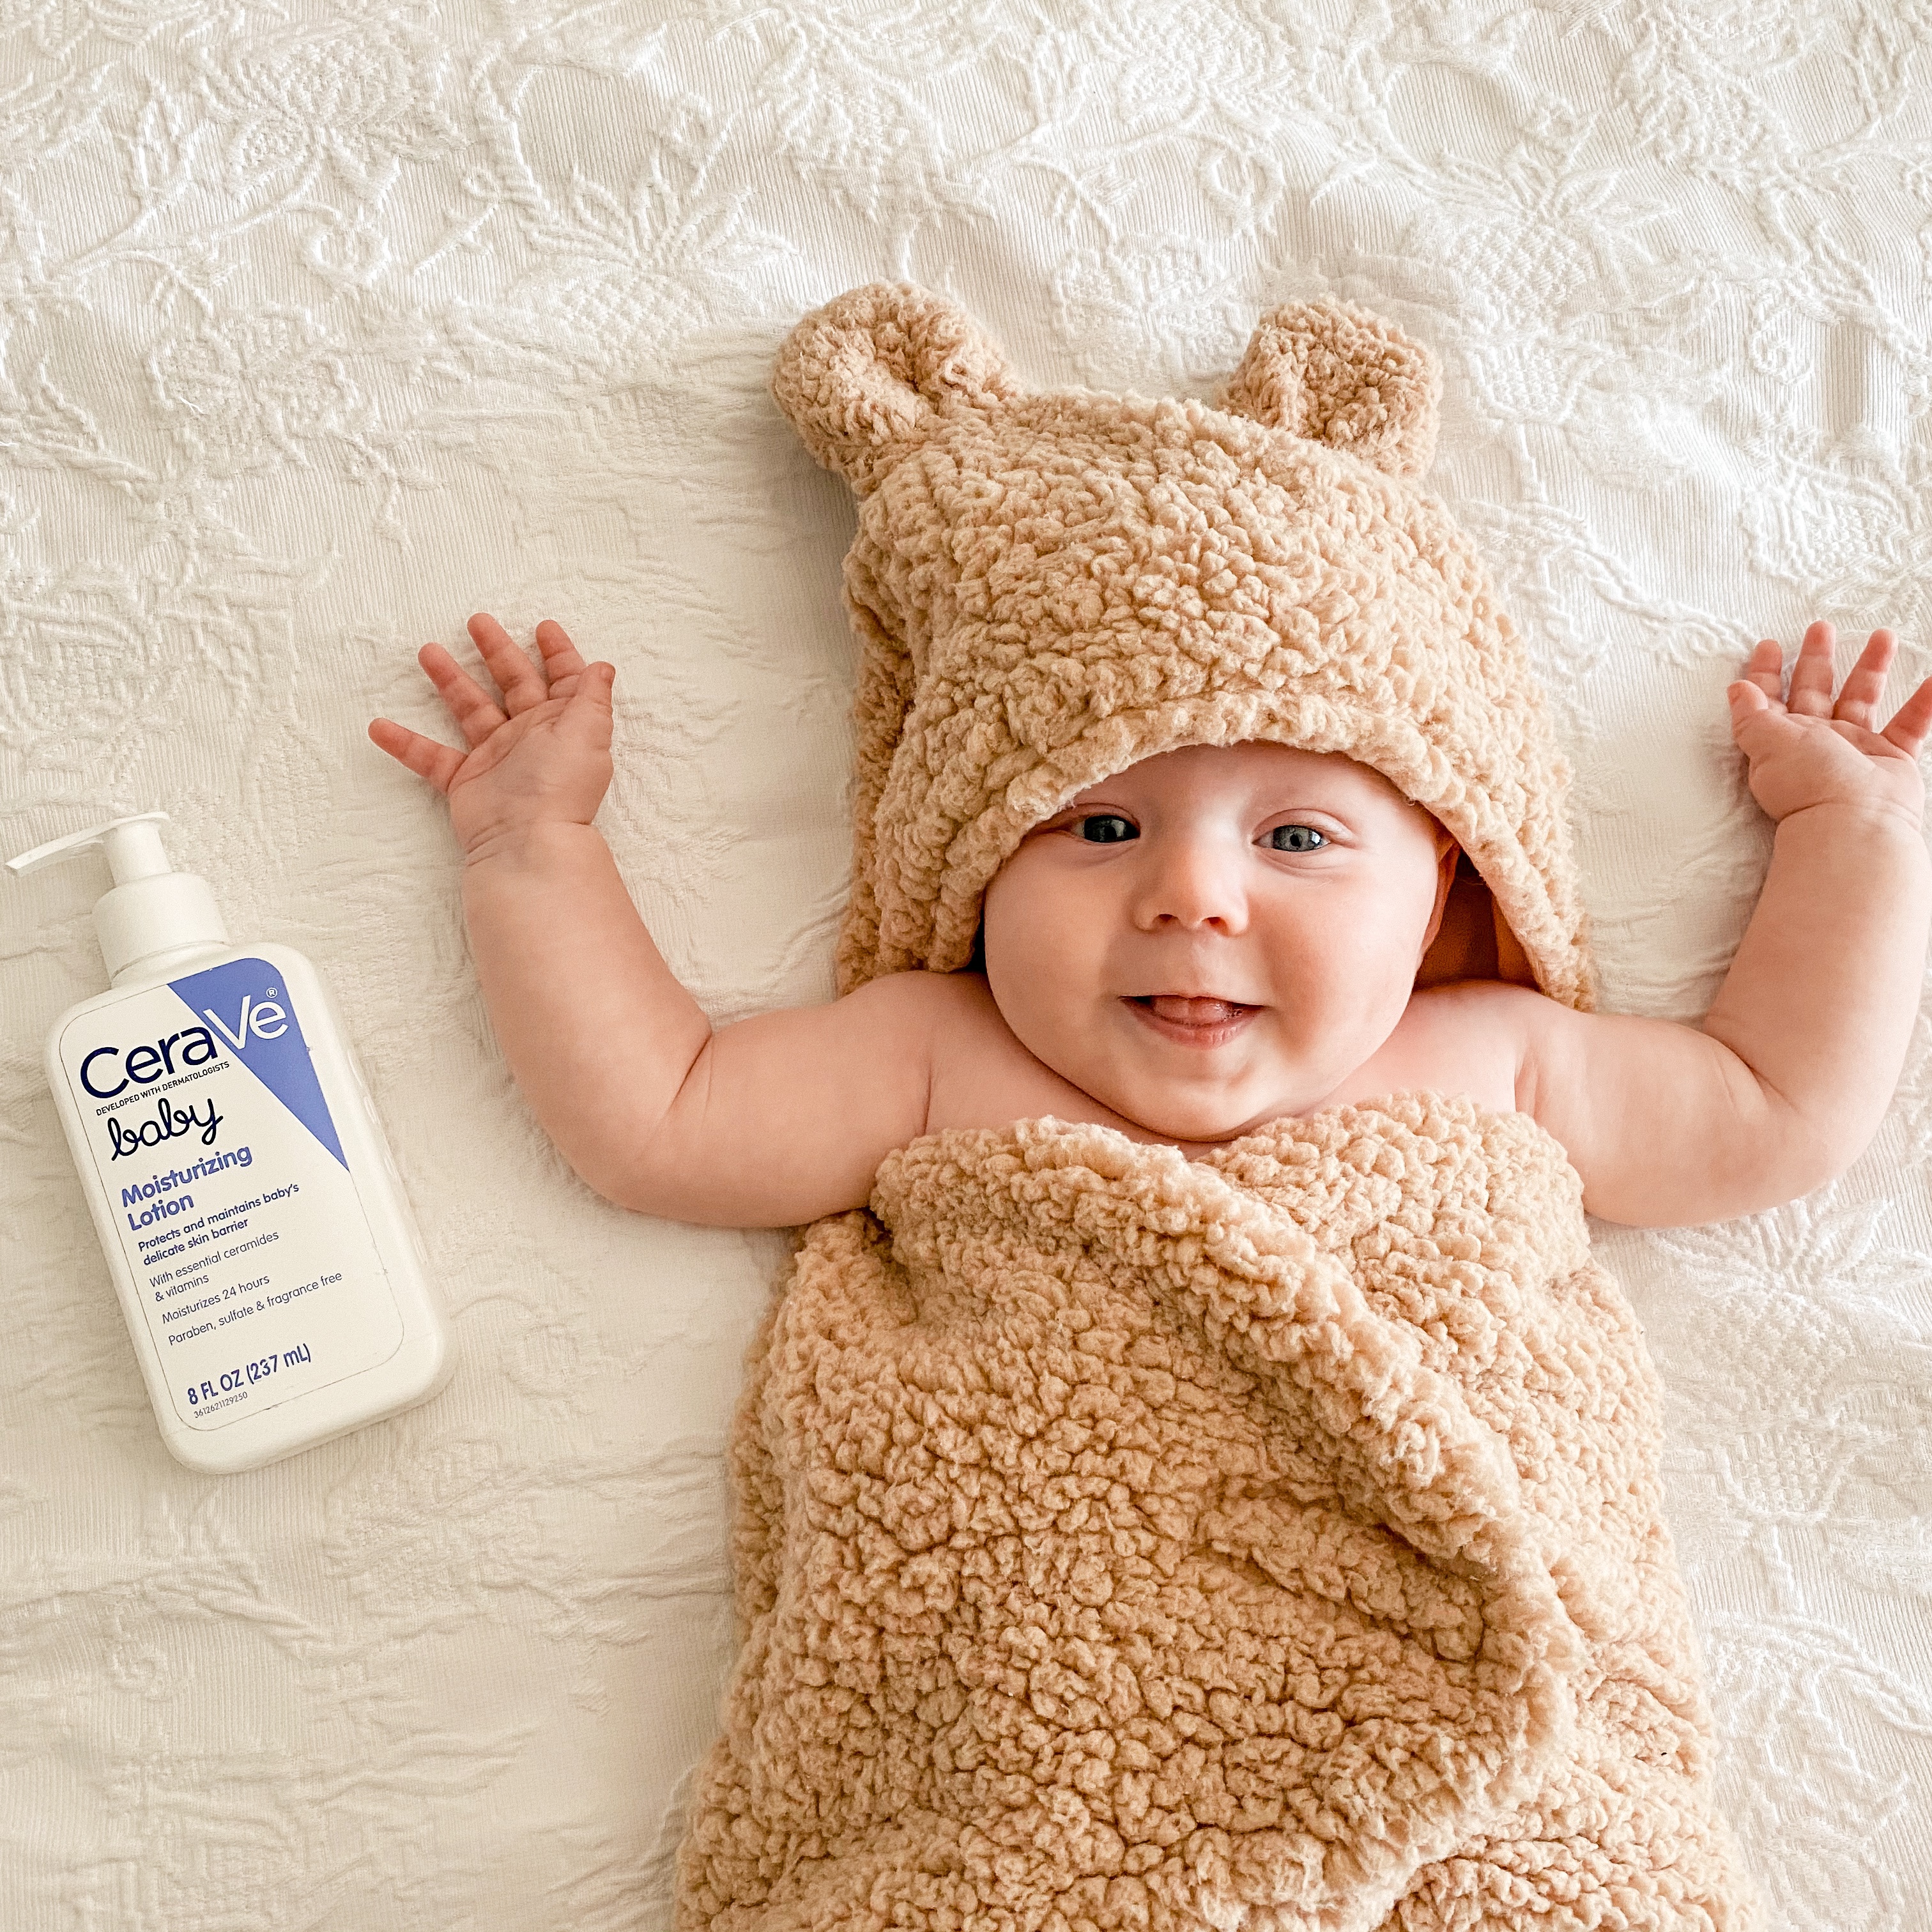 Baby Essentials: 8 Must-Have Products